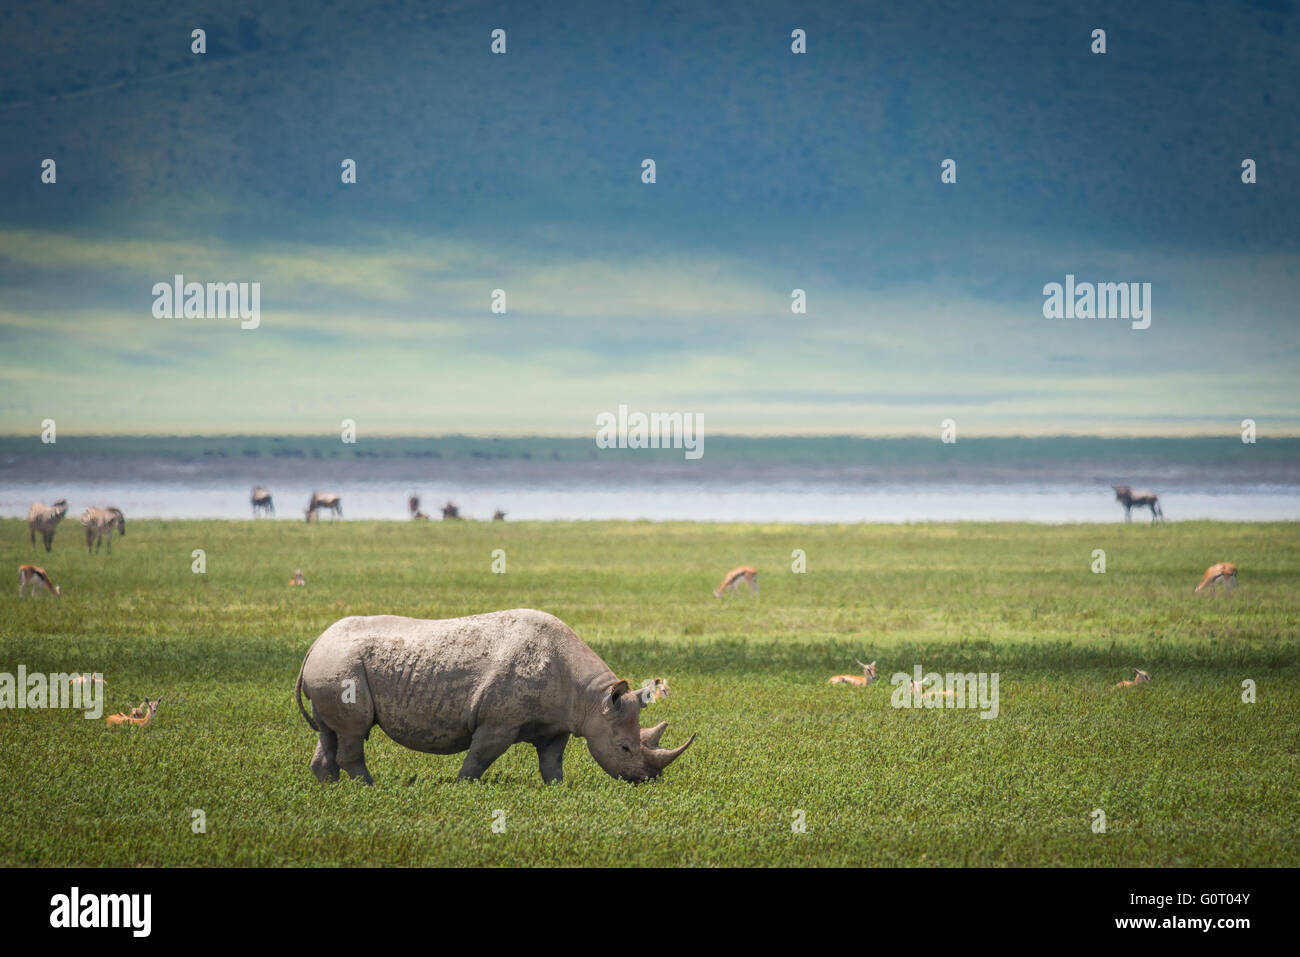 A wild Hook-lipped (Black) Rhinoceros in the Ngorongoro Crater Conservation Area of Tanzania in East Africa Stock Photo